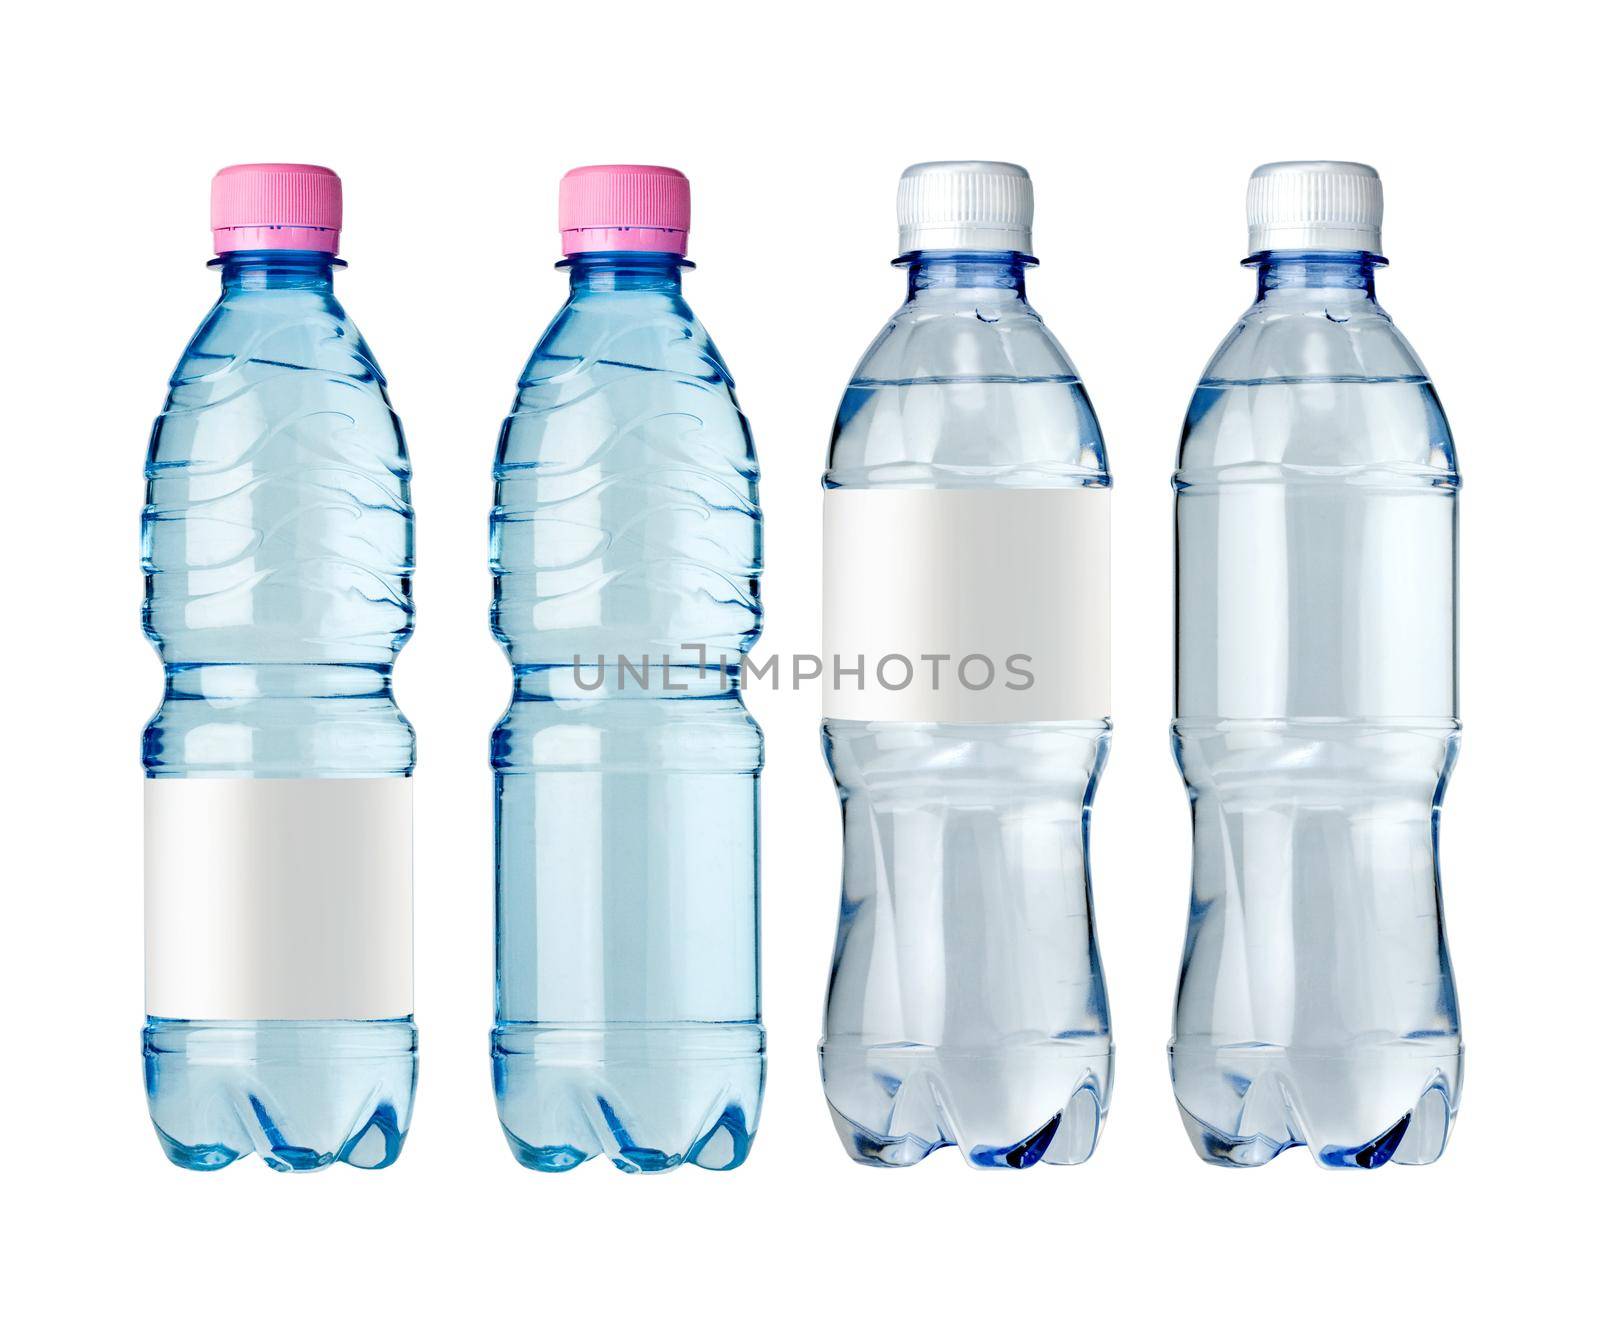  water bottles with  label by kornienko